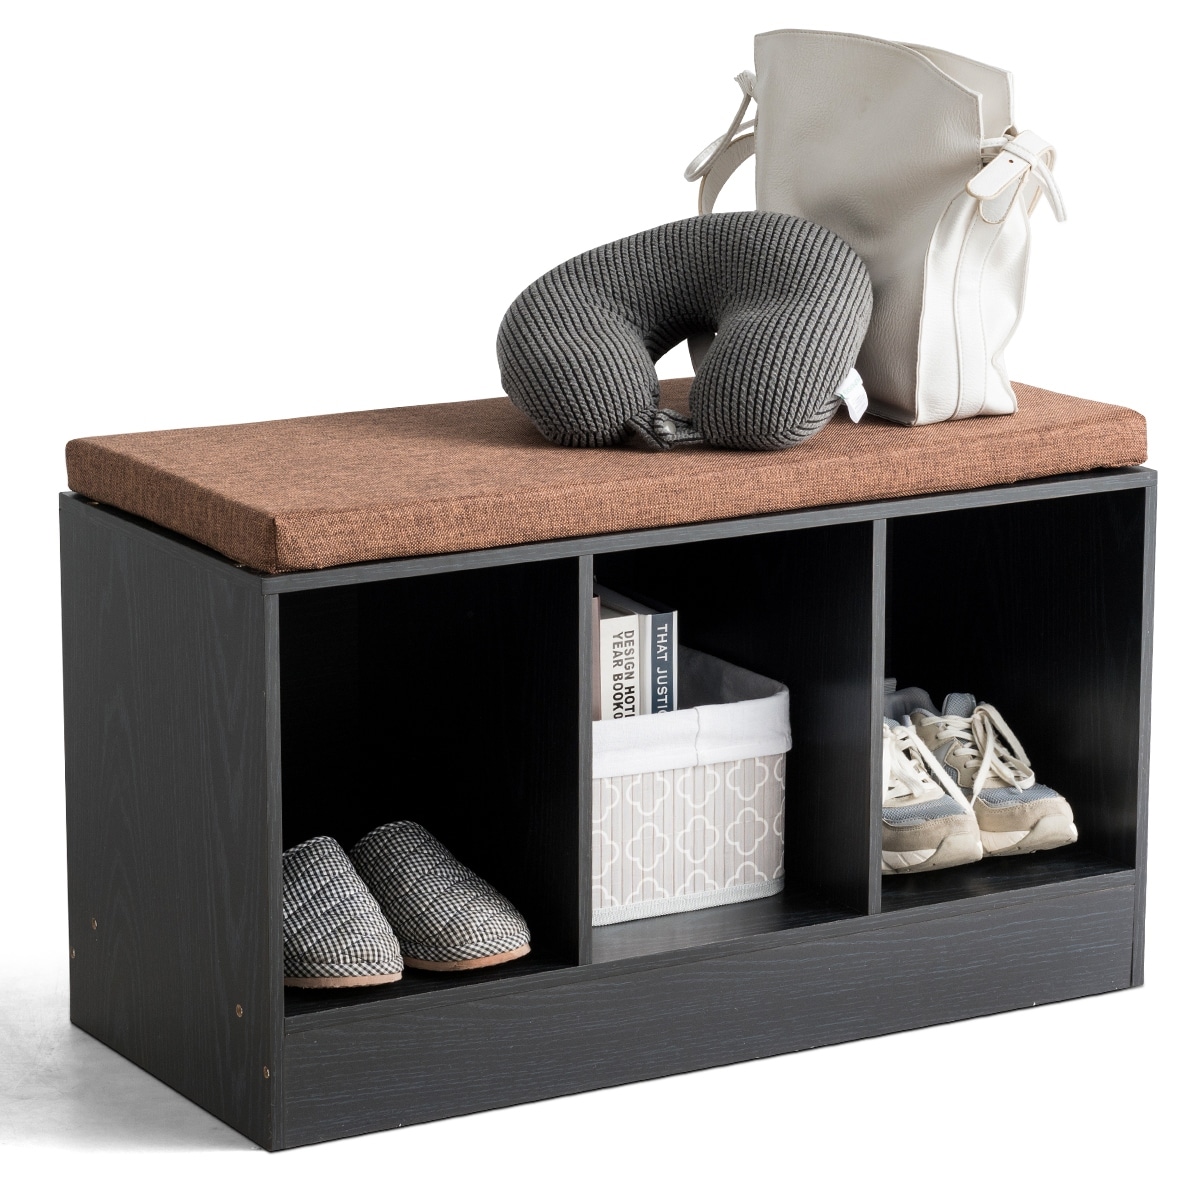 https://ak1.ostkcdn.com/images/products/is/images/direct/163e0bfcf18ae9a4e1c17df15af4da0d9e1c3f6f/Costway-3-Cube-Storage-Box-Organizer-Shoe-Bench-w--Padded-Cushion-Books-Toys-Decorations.jpg